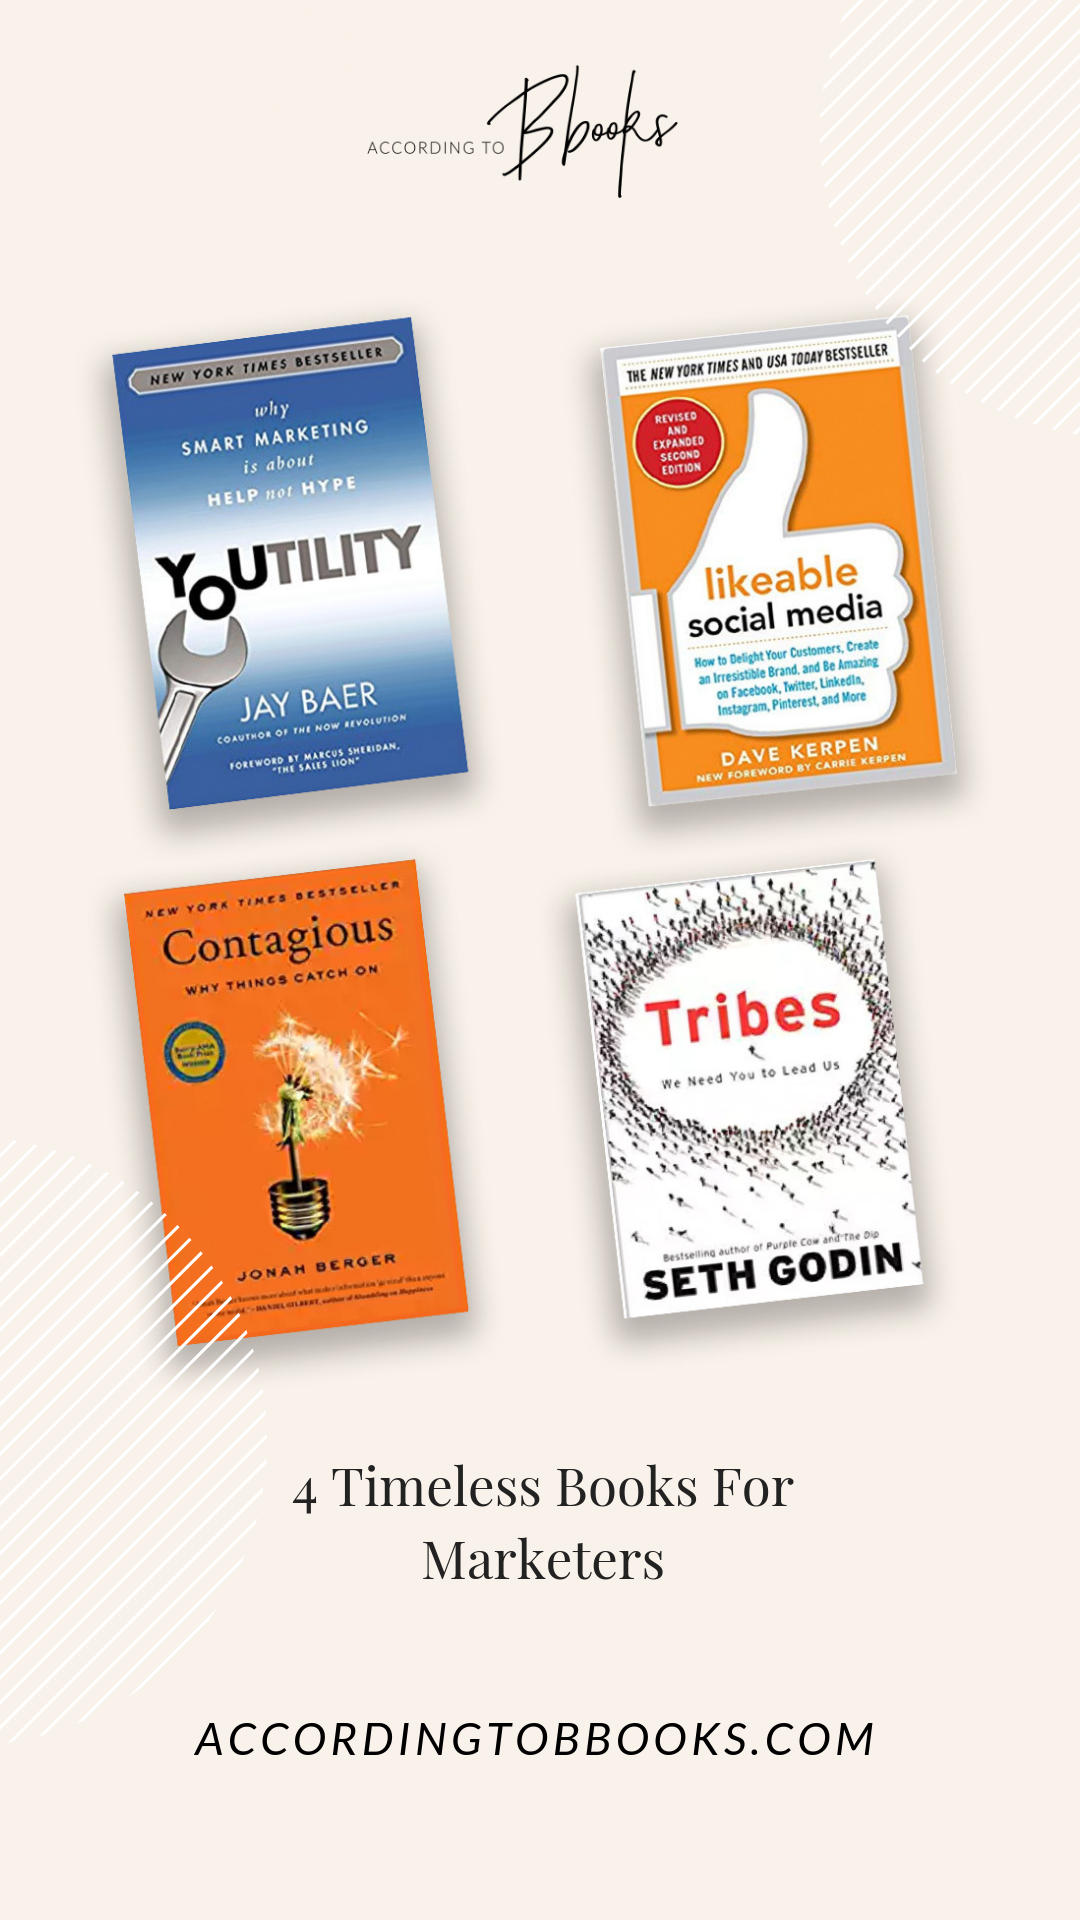 4 Timeless Books for Marketers